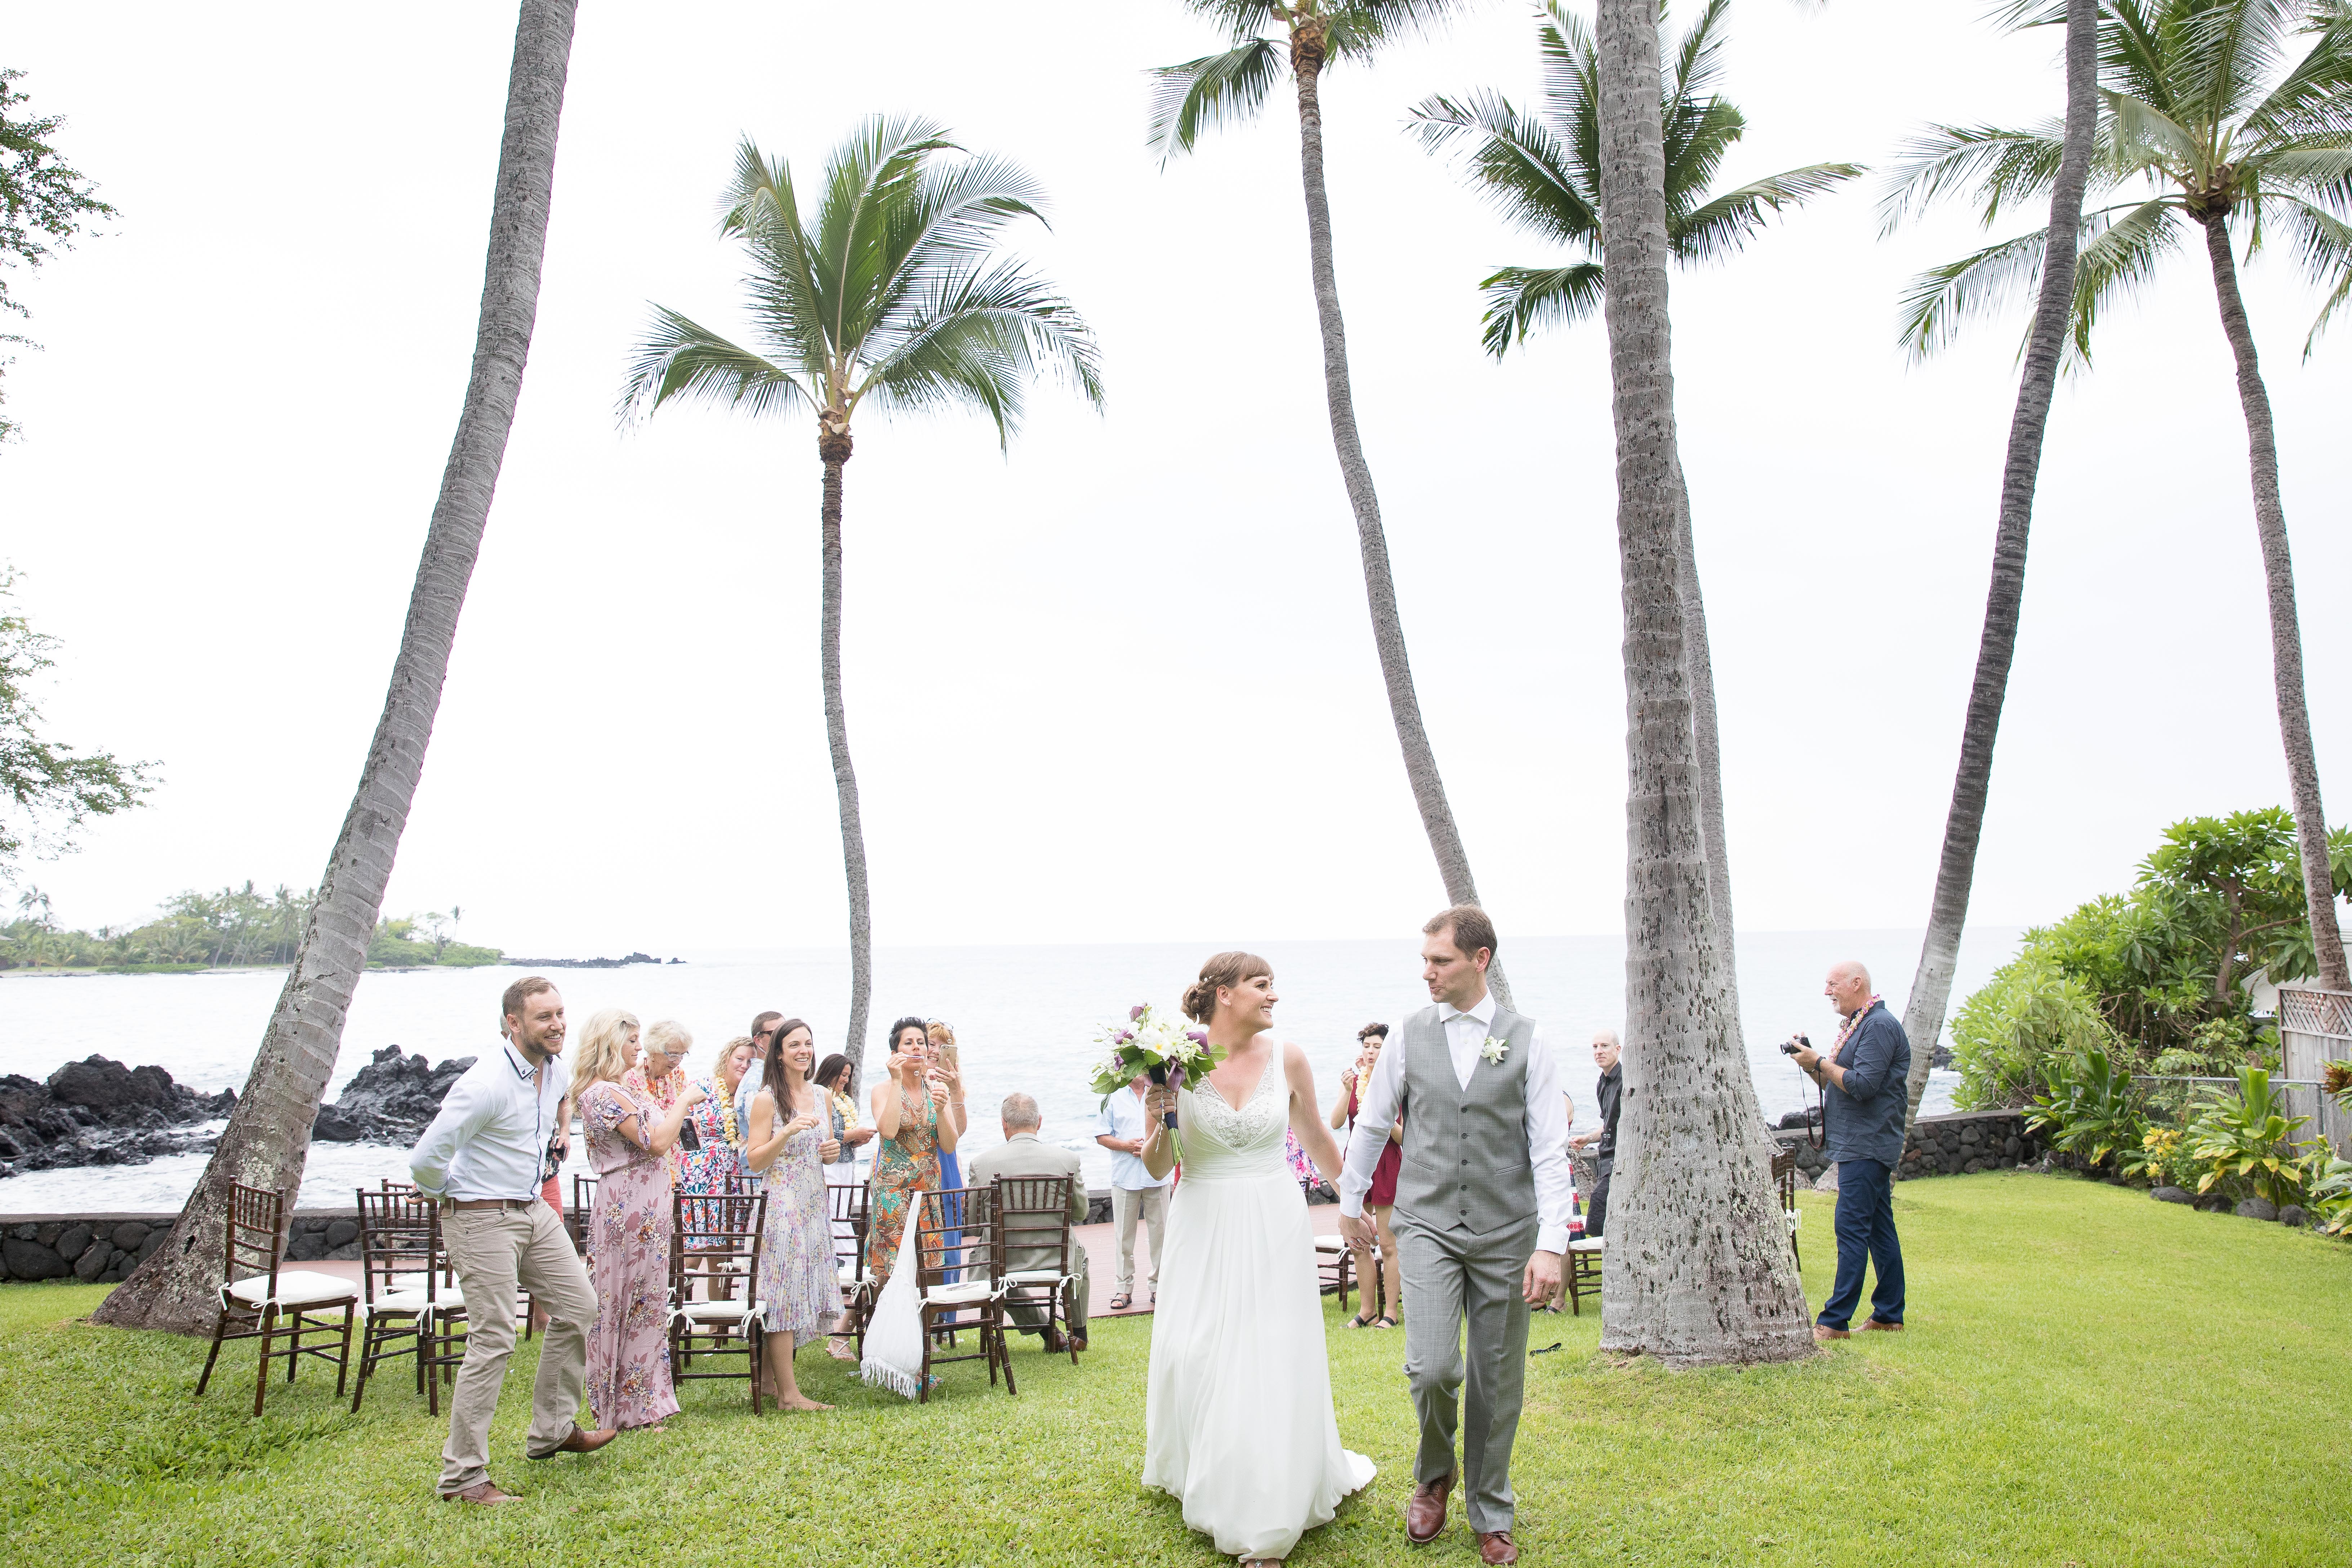 couple get married in Hawaii with palm trees